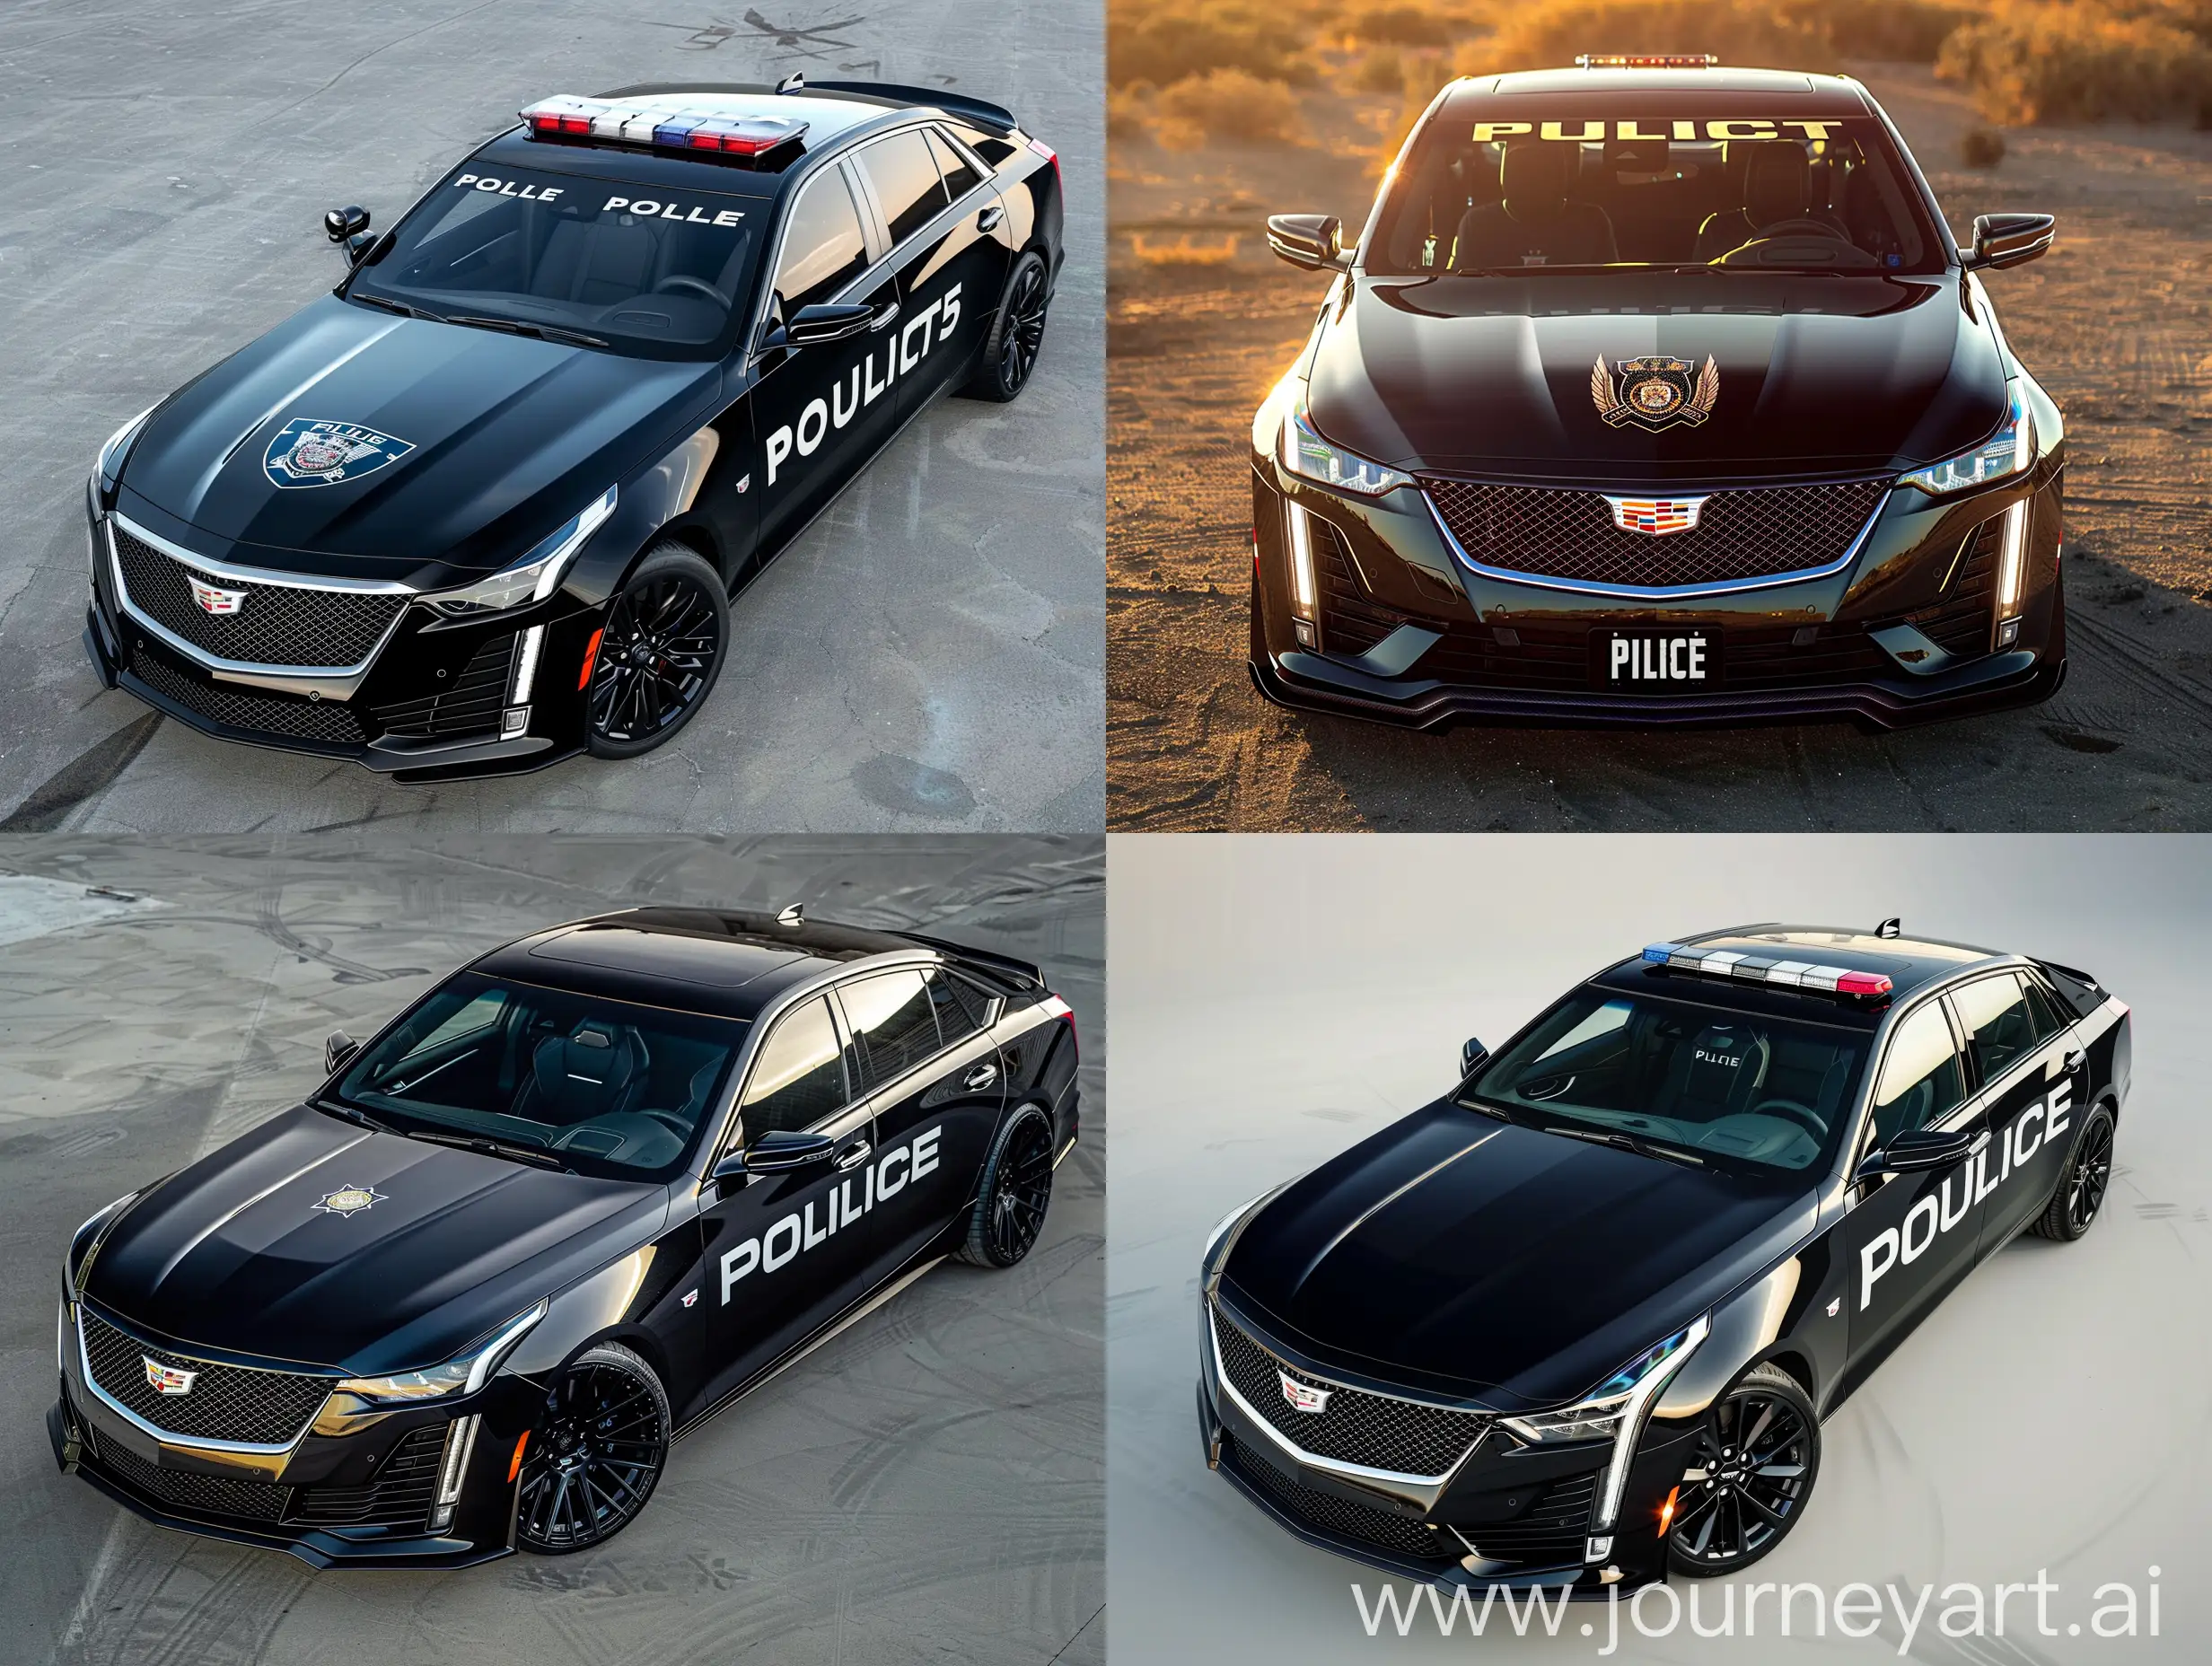 imagine a Cadillac CT5 skin of an investigative police with fine and elegant features, minimalist and modern, it should contain the police coat of arms on the hood and police written on the sides, show the entire car